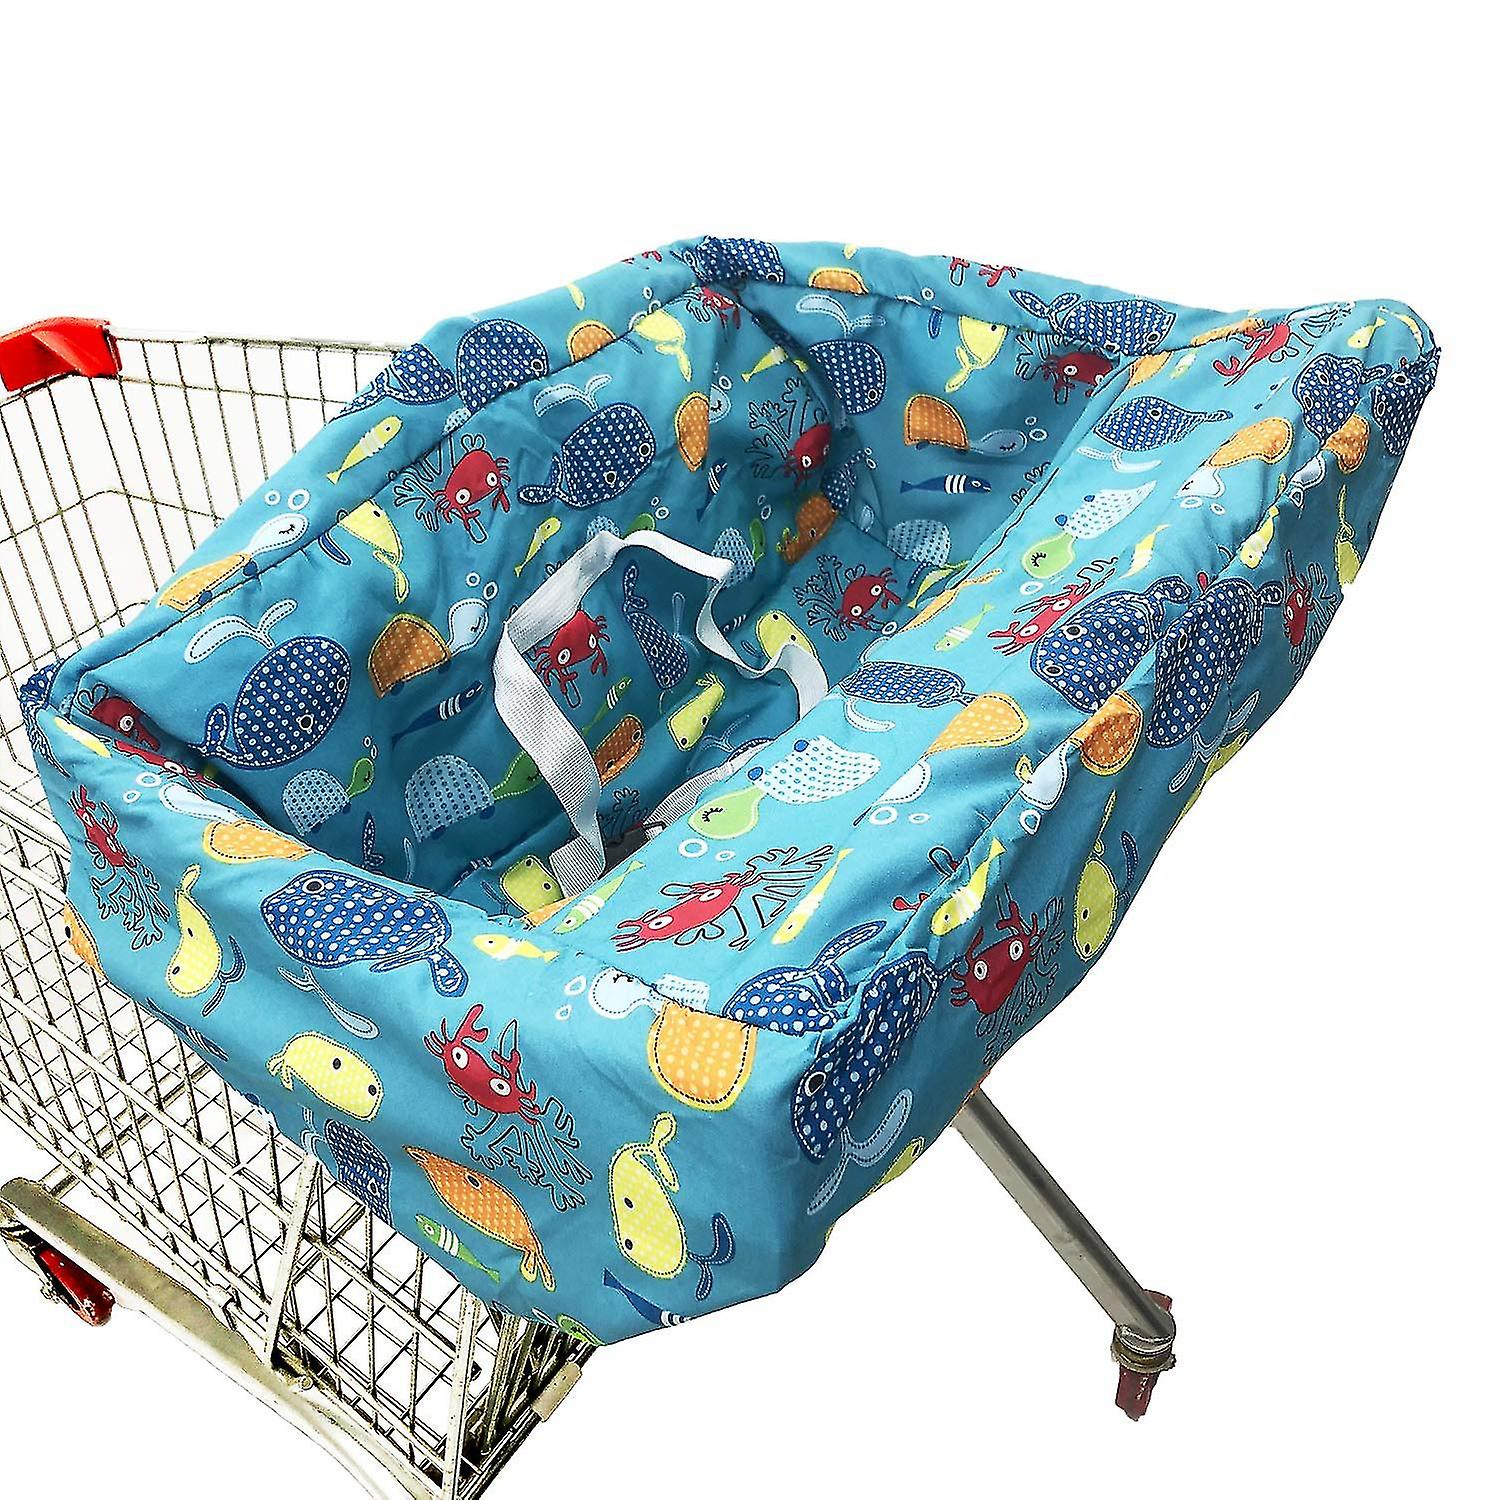 Portable Cart Cover | High Ch And Grocery Cart Covers For Ba， Kids， Infants Toddlers Includes Carry Bag (simple Sea )